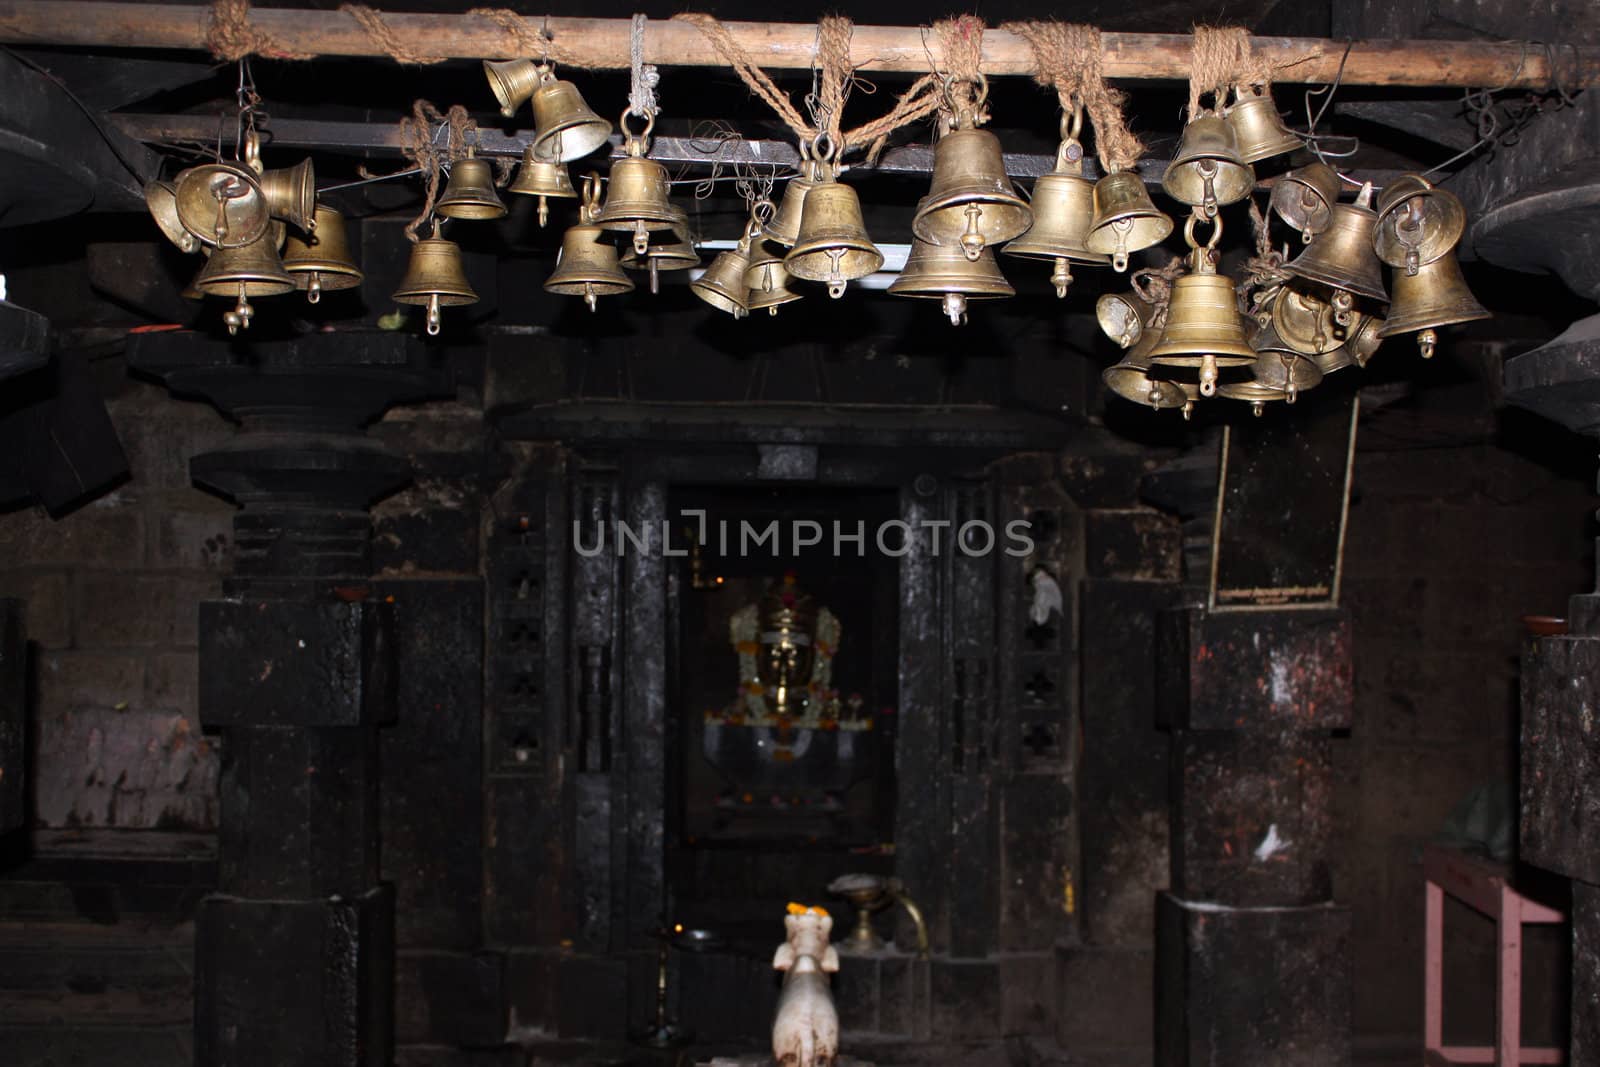 Many bells hanging in an ancient hindu temple in India.